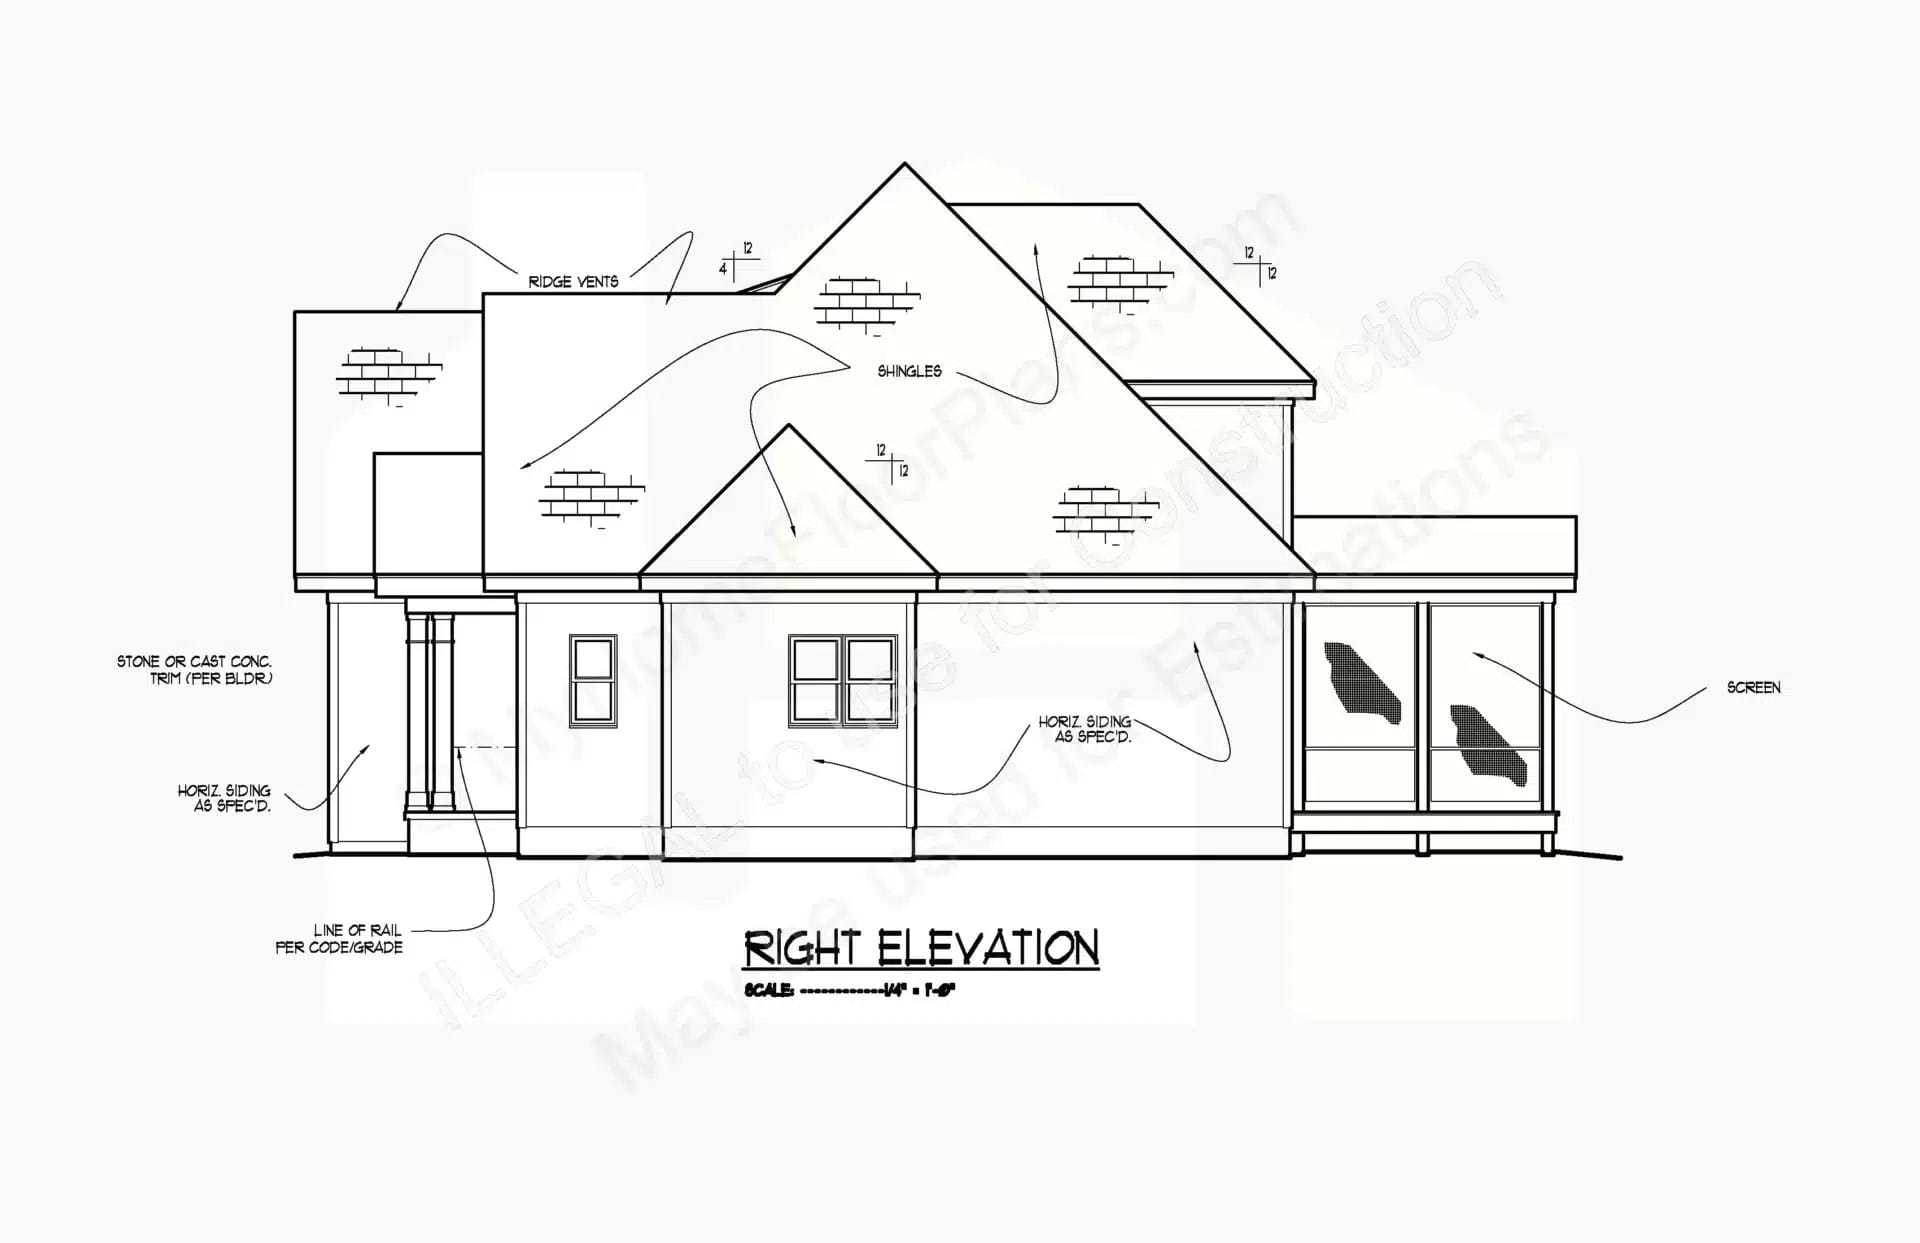 An architectural drawing labeled "right elevation" of a 13-1214 multiple-gabled home with annotations indicating material specifications and dimensions. The illustration includes side views of windows, doors, and rooflines.